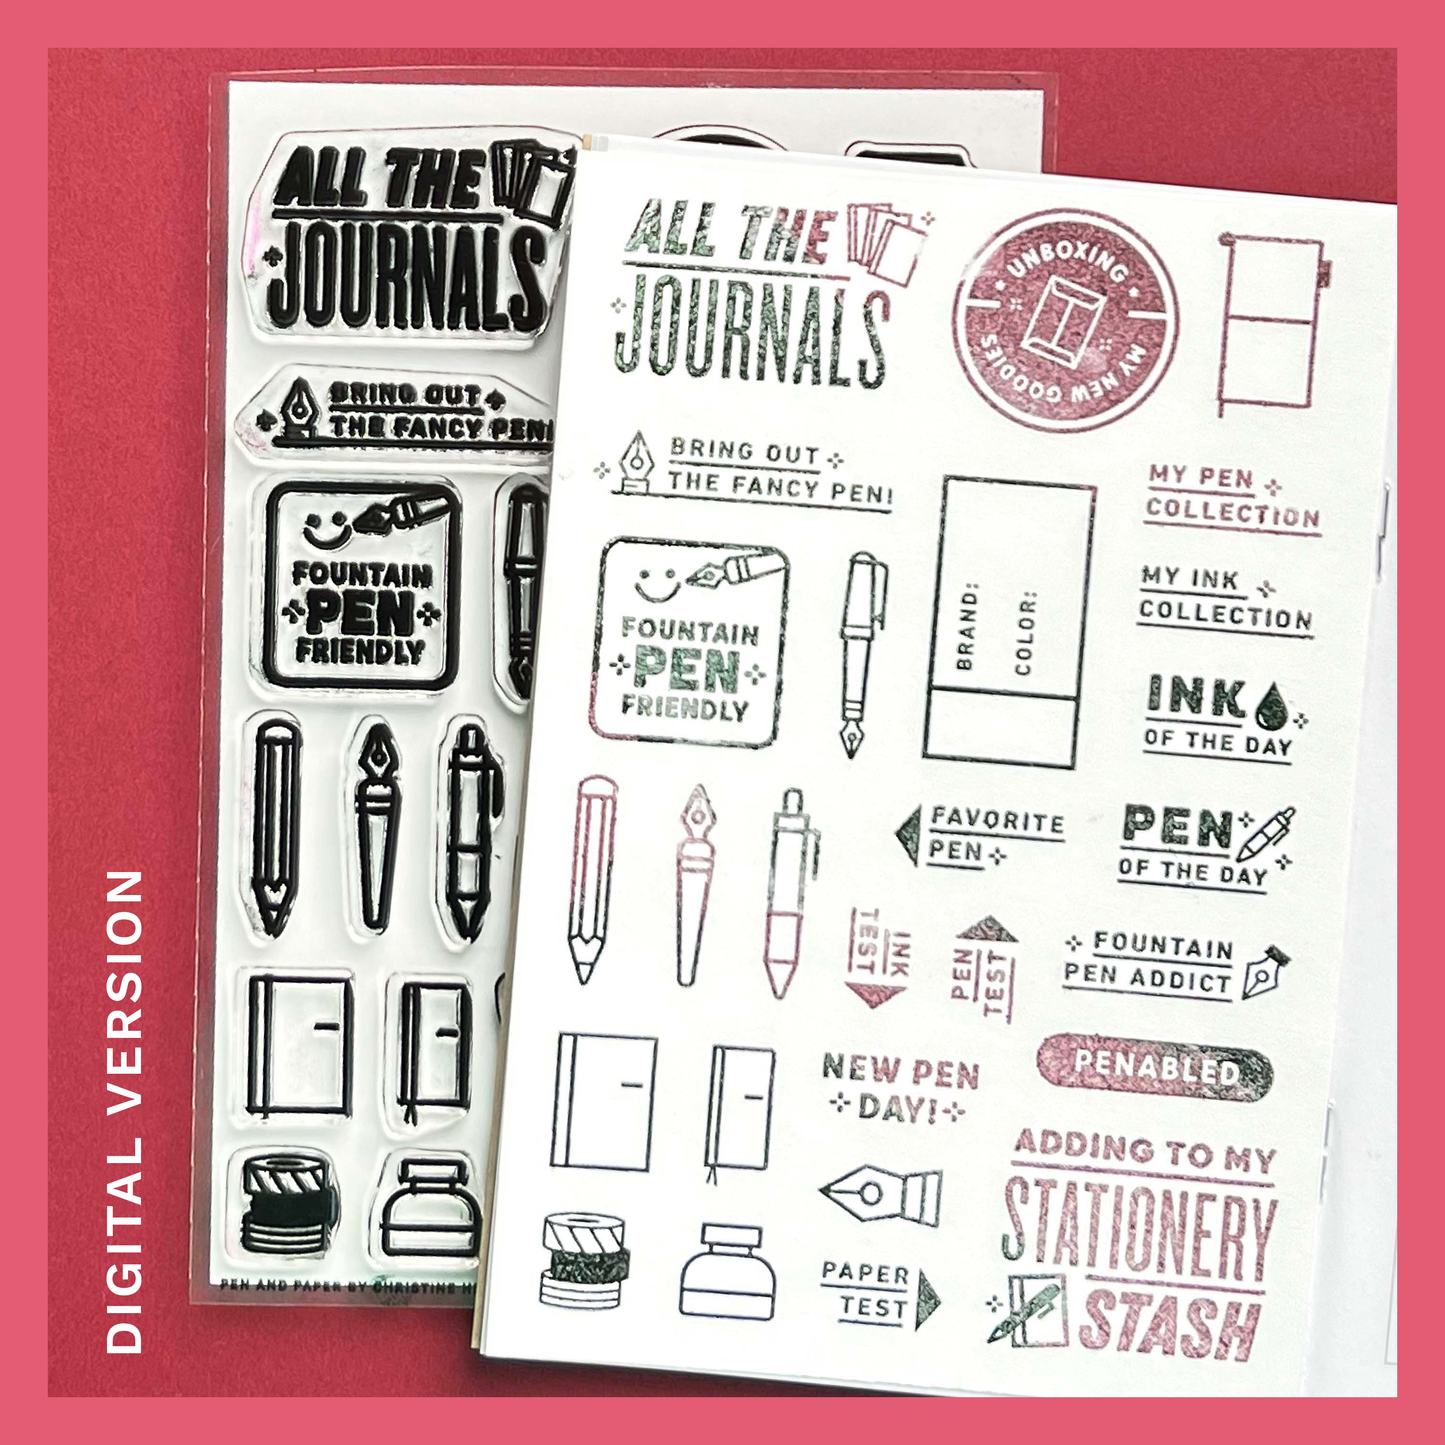 Subject to Change Pencil Set – Special Special